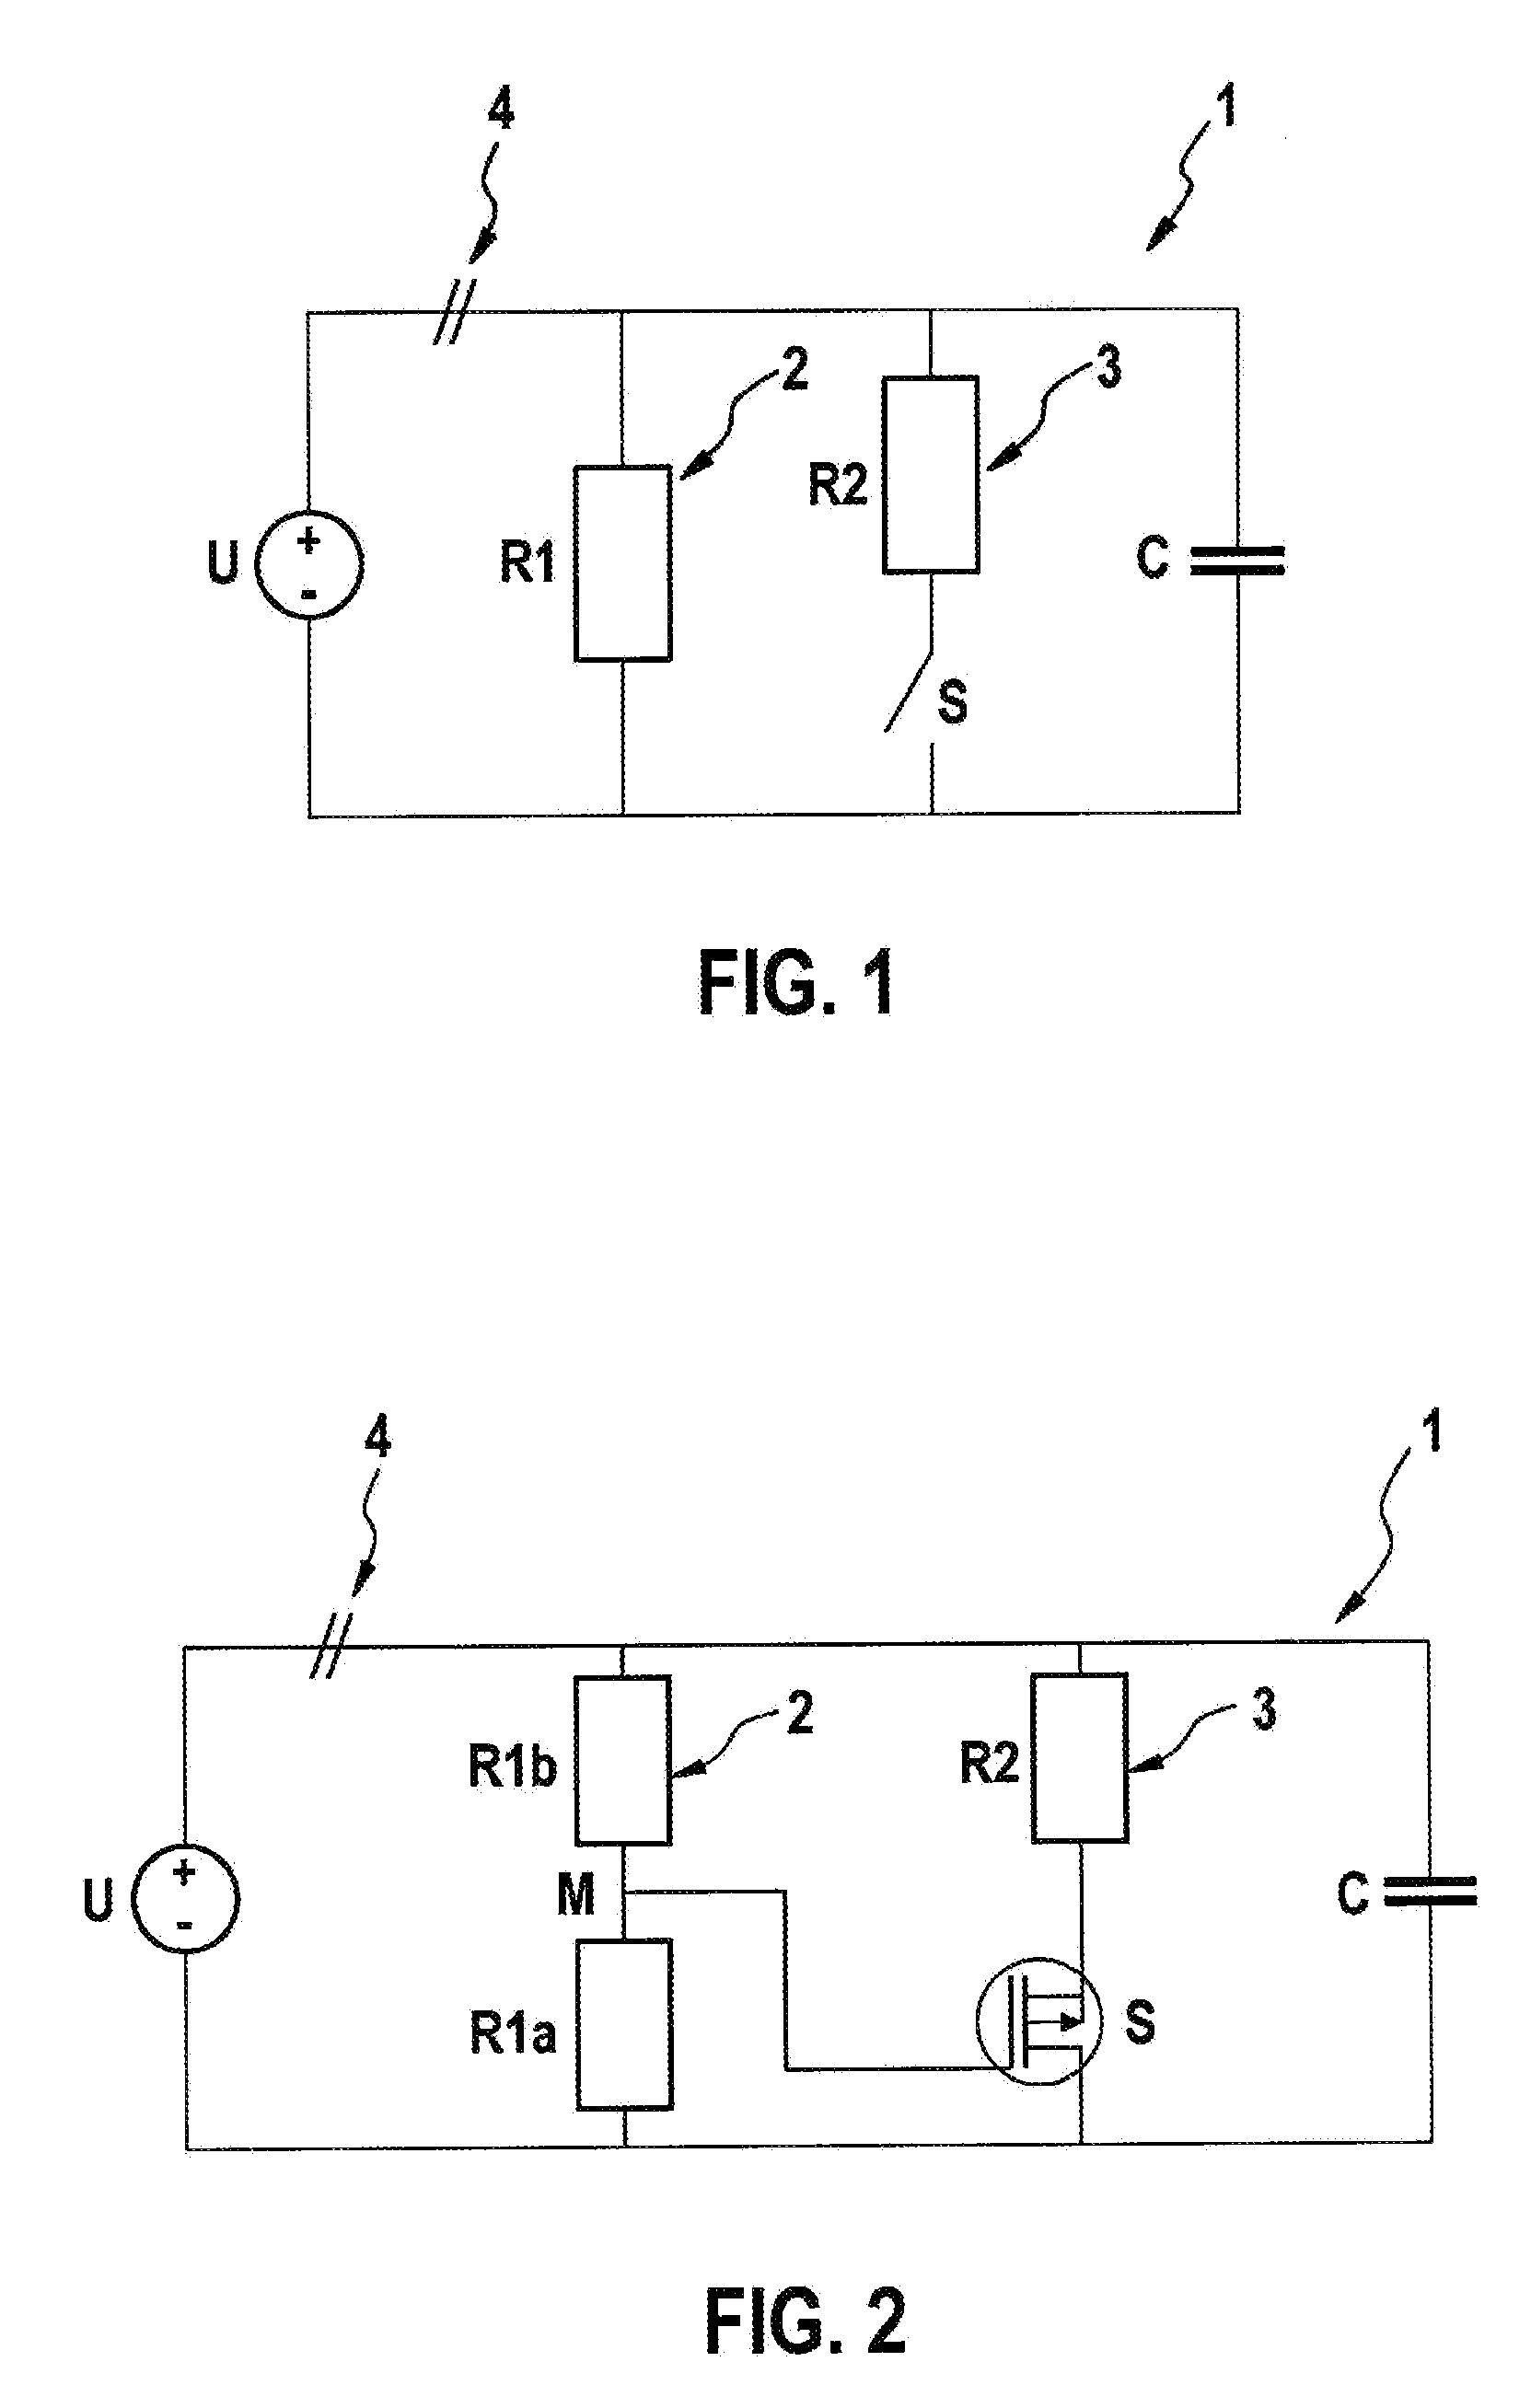 Method and apparatus for discharging an energy store in a high-voltage power supply system